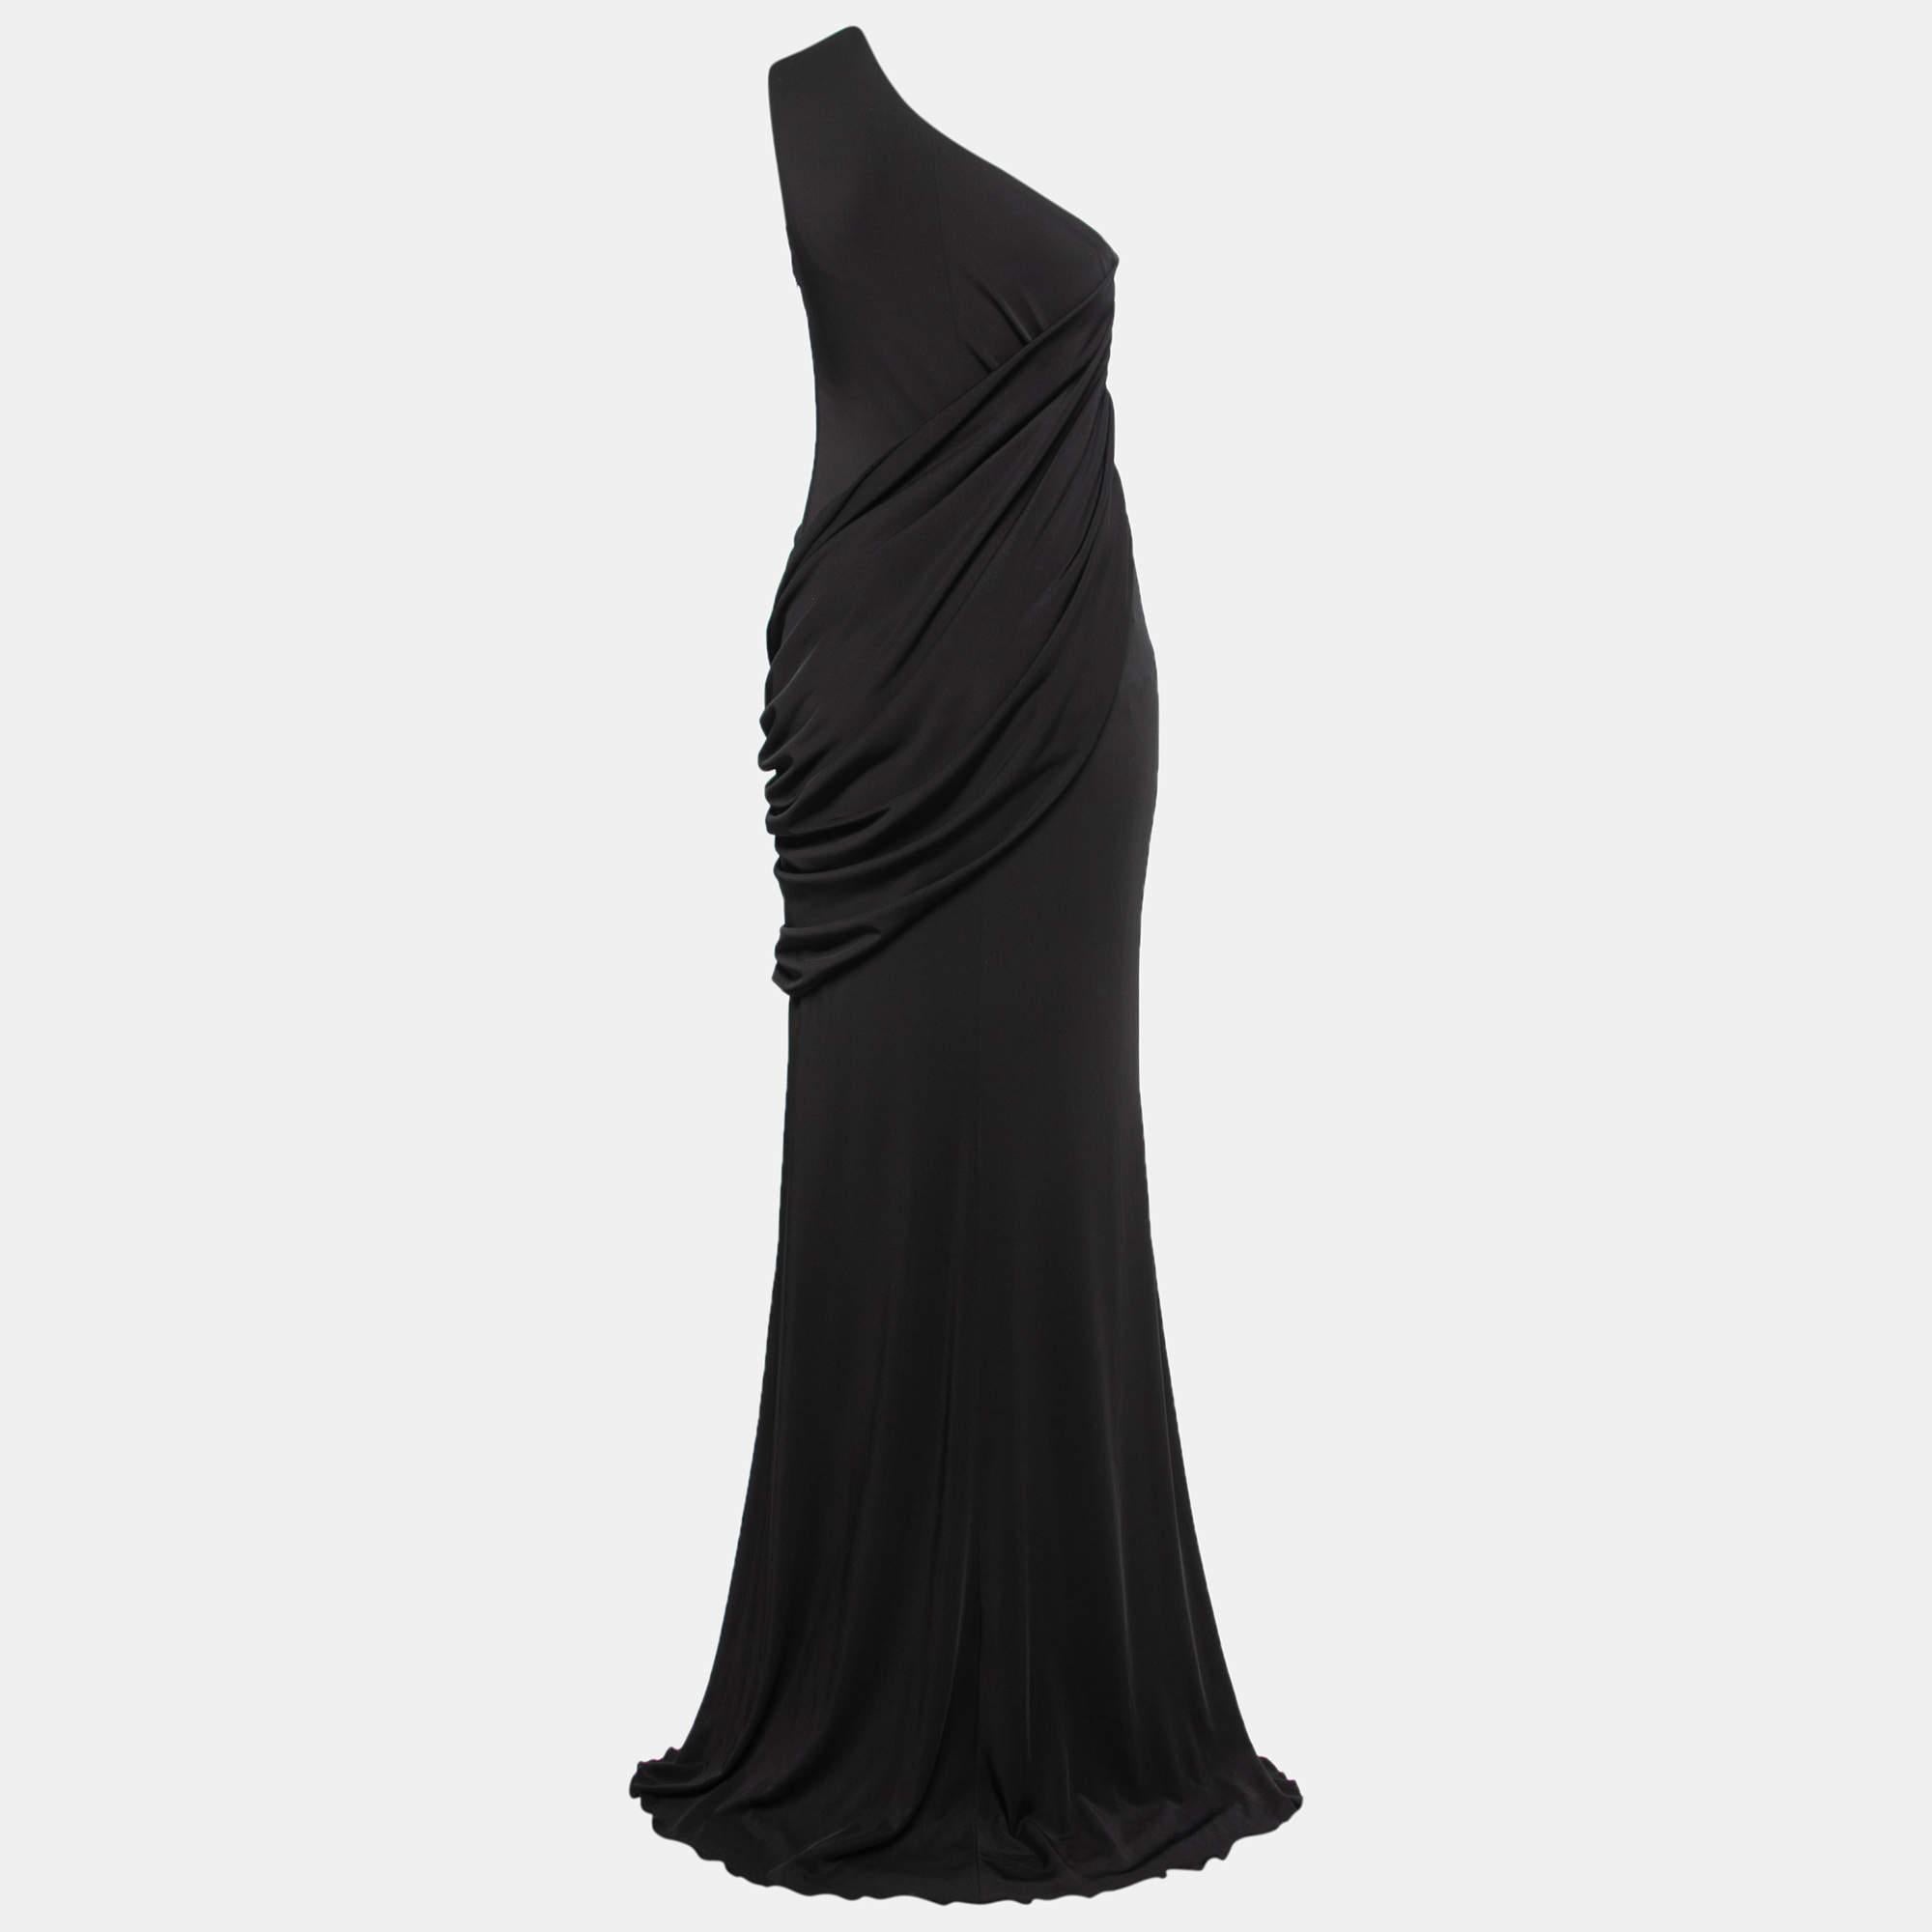 For all evening soirées and high-affair parties, a gown like this makes sure you look the best of all. Tailored into a superb fit and style, this gown is elevated with a stunning neckline and a beautiful hue. Bring home this lovely gown